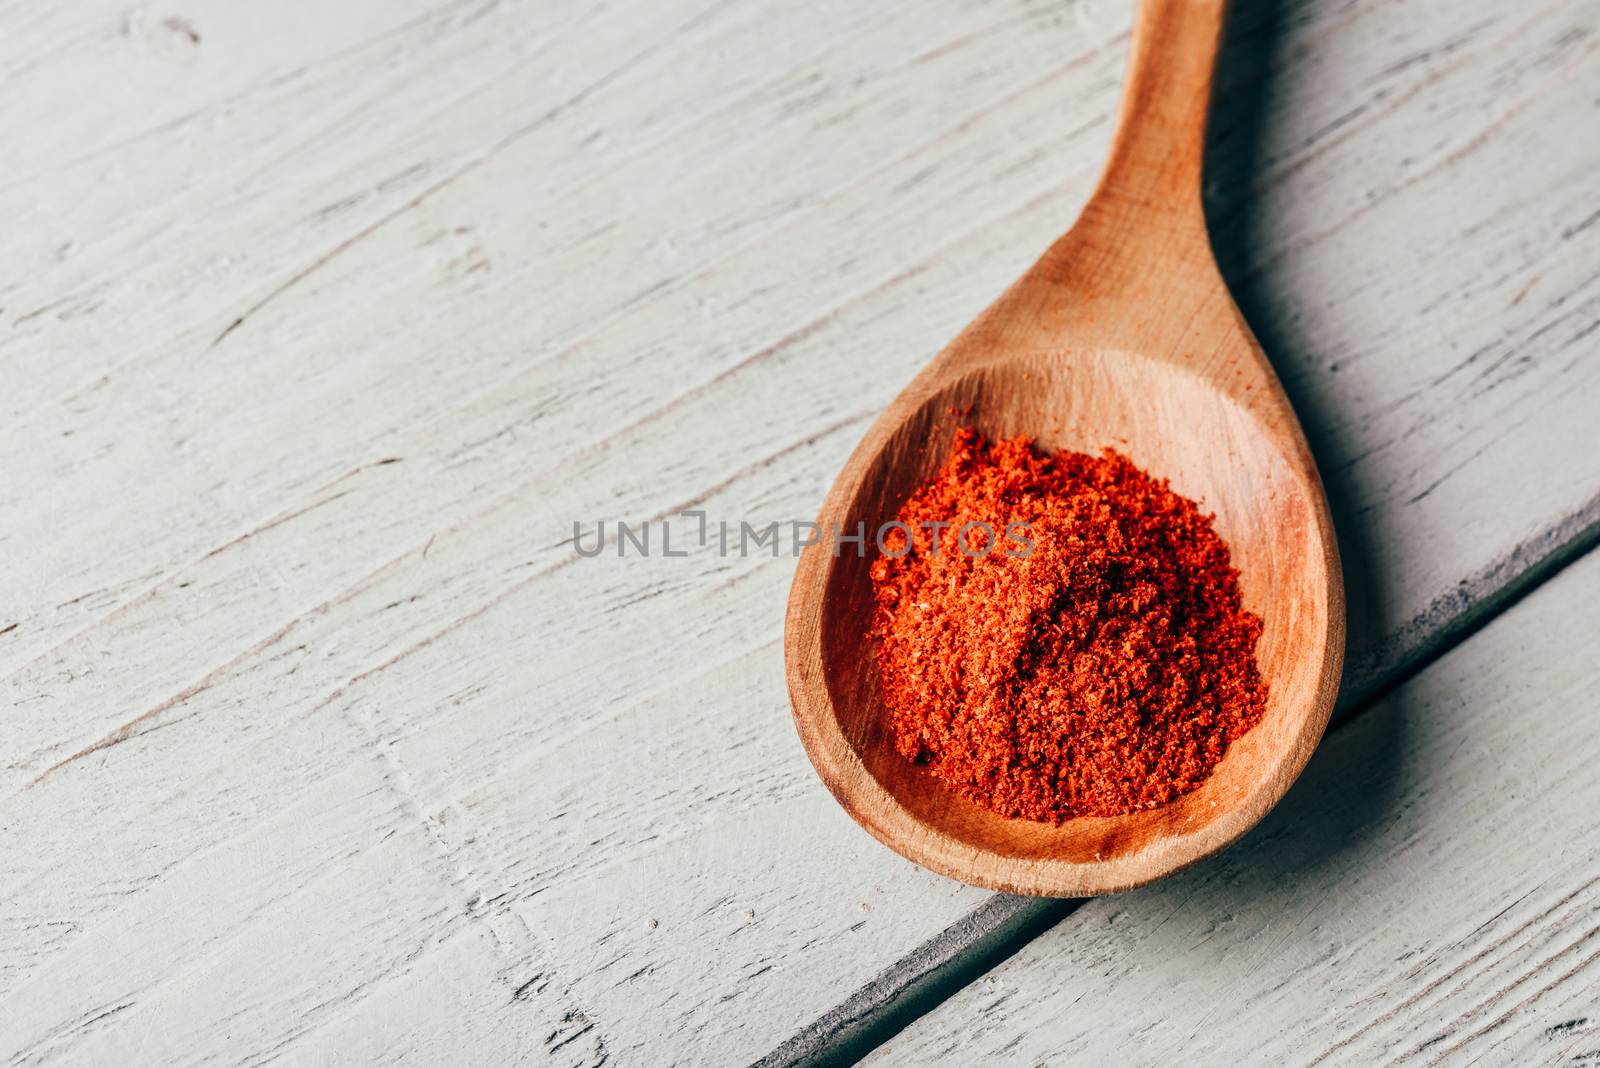 Wooden spoonful of red chili pepper powder